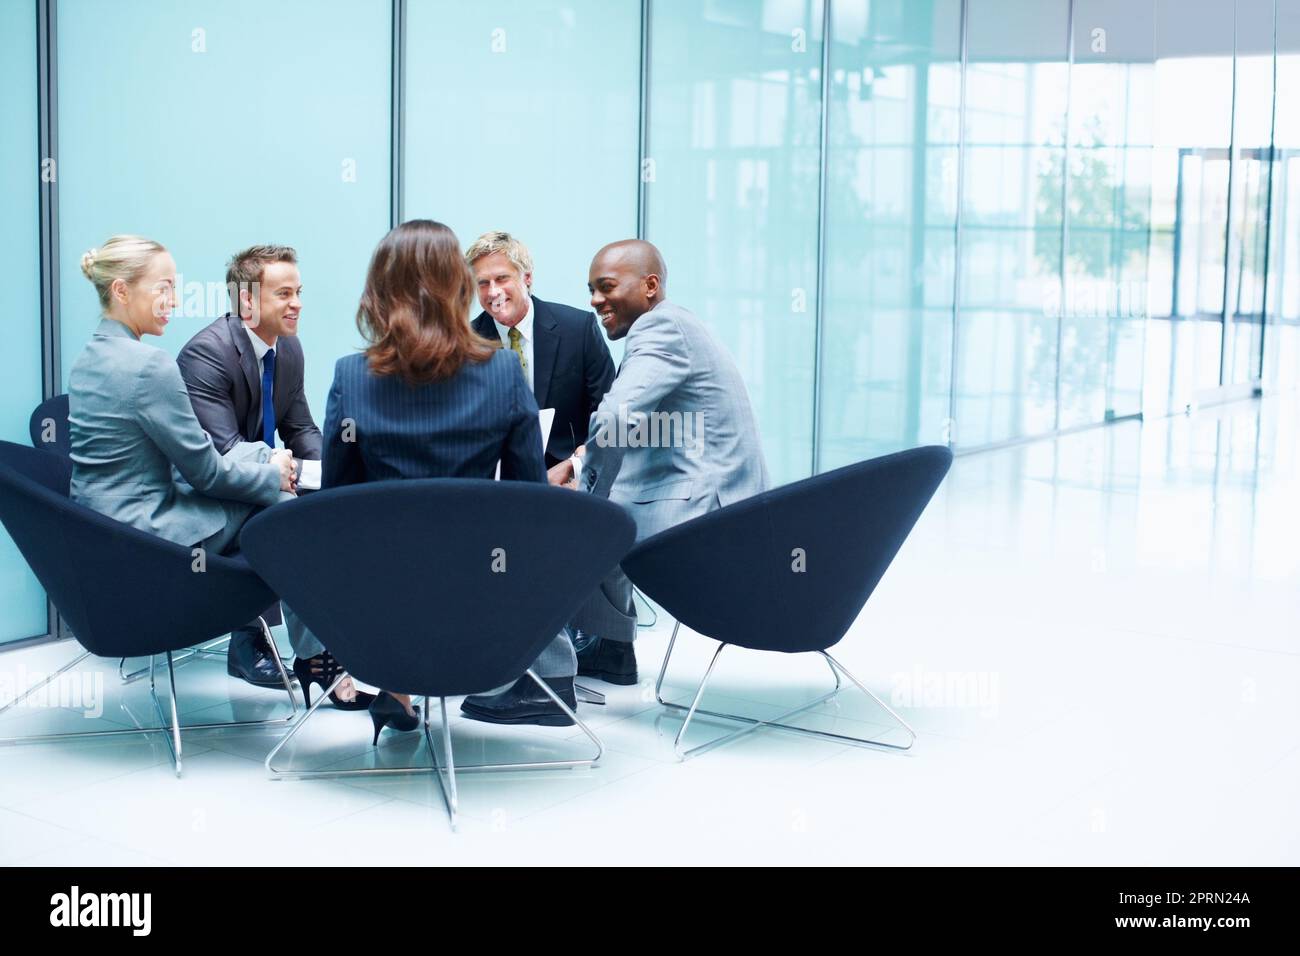 Business people in discussion. Portrait of multi racial business people discussing in meeting. Stock Photo